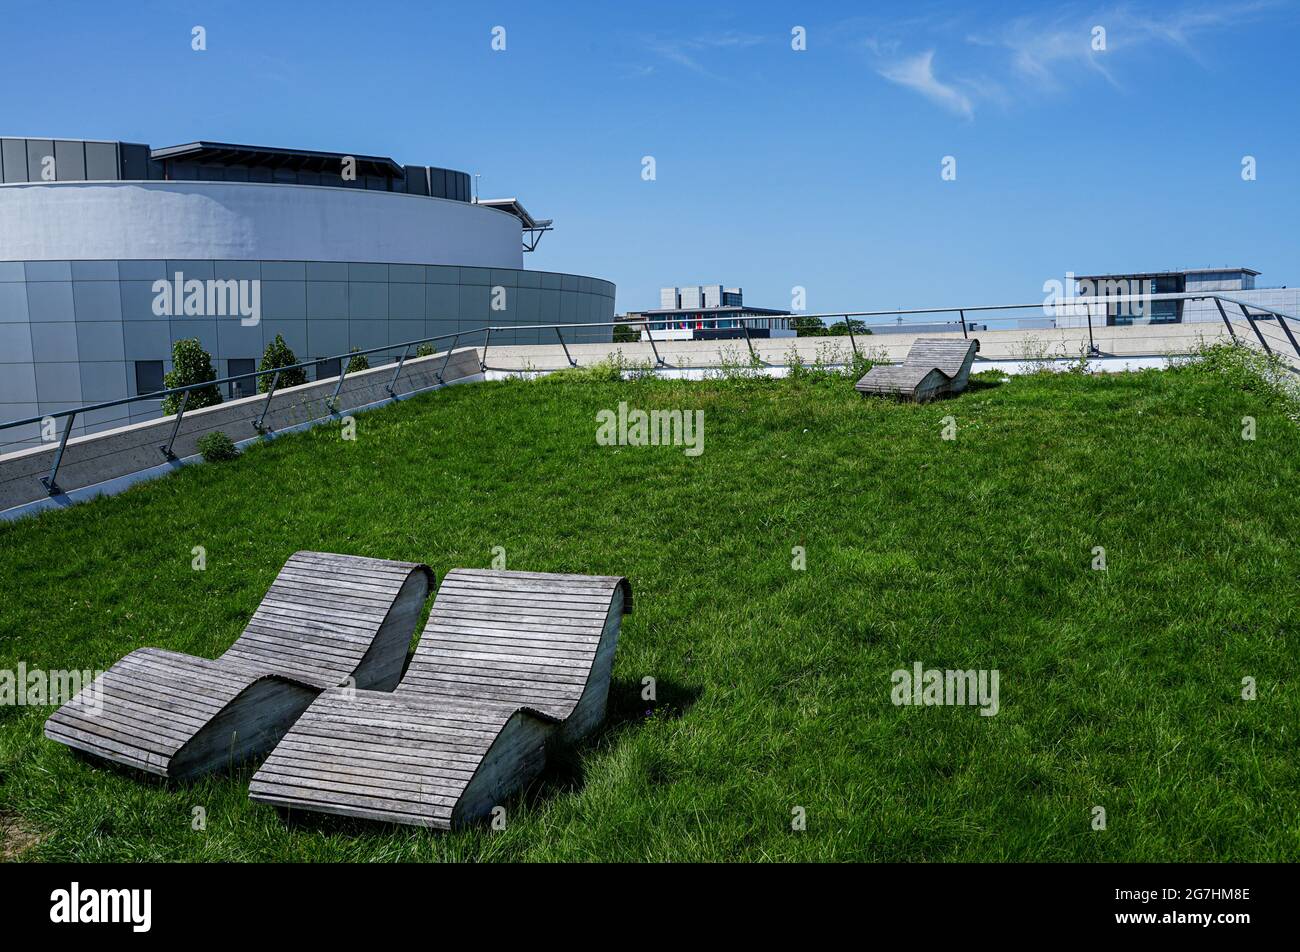 Students at the Technical University of Munich, Garching Campus can relax on the deck chairs of the subway station Garching Forschungszentrum. Stock Photo